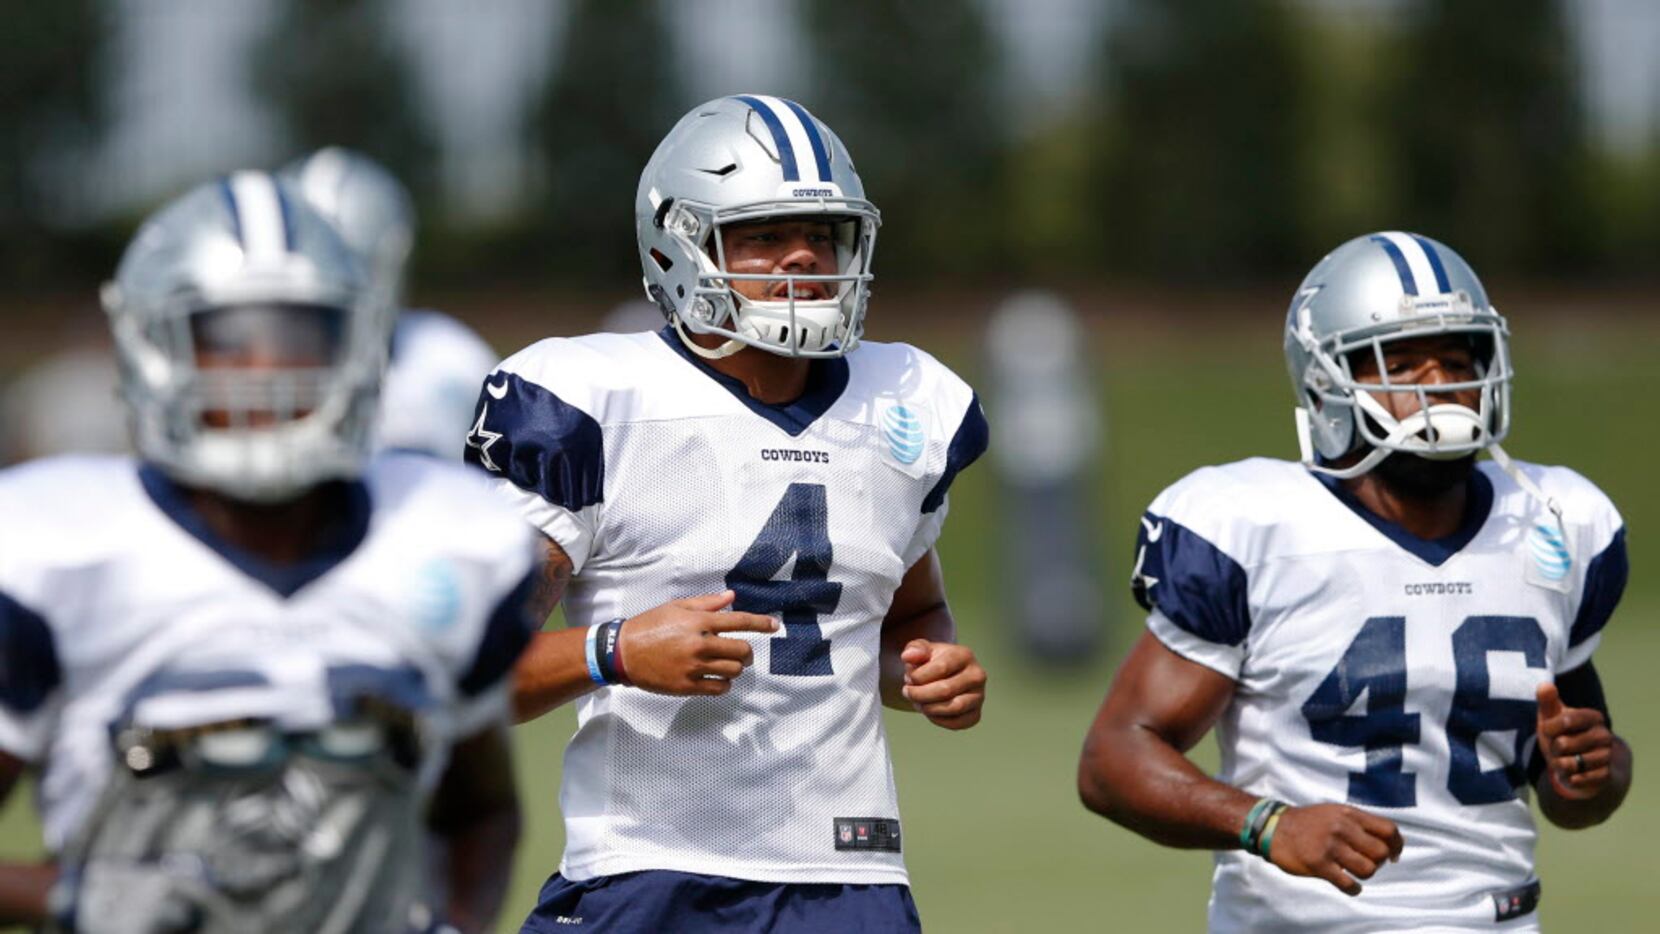 Dak Prescott's college coach: 'He's going to handle the moment well' of  being Cowboys' starting QB